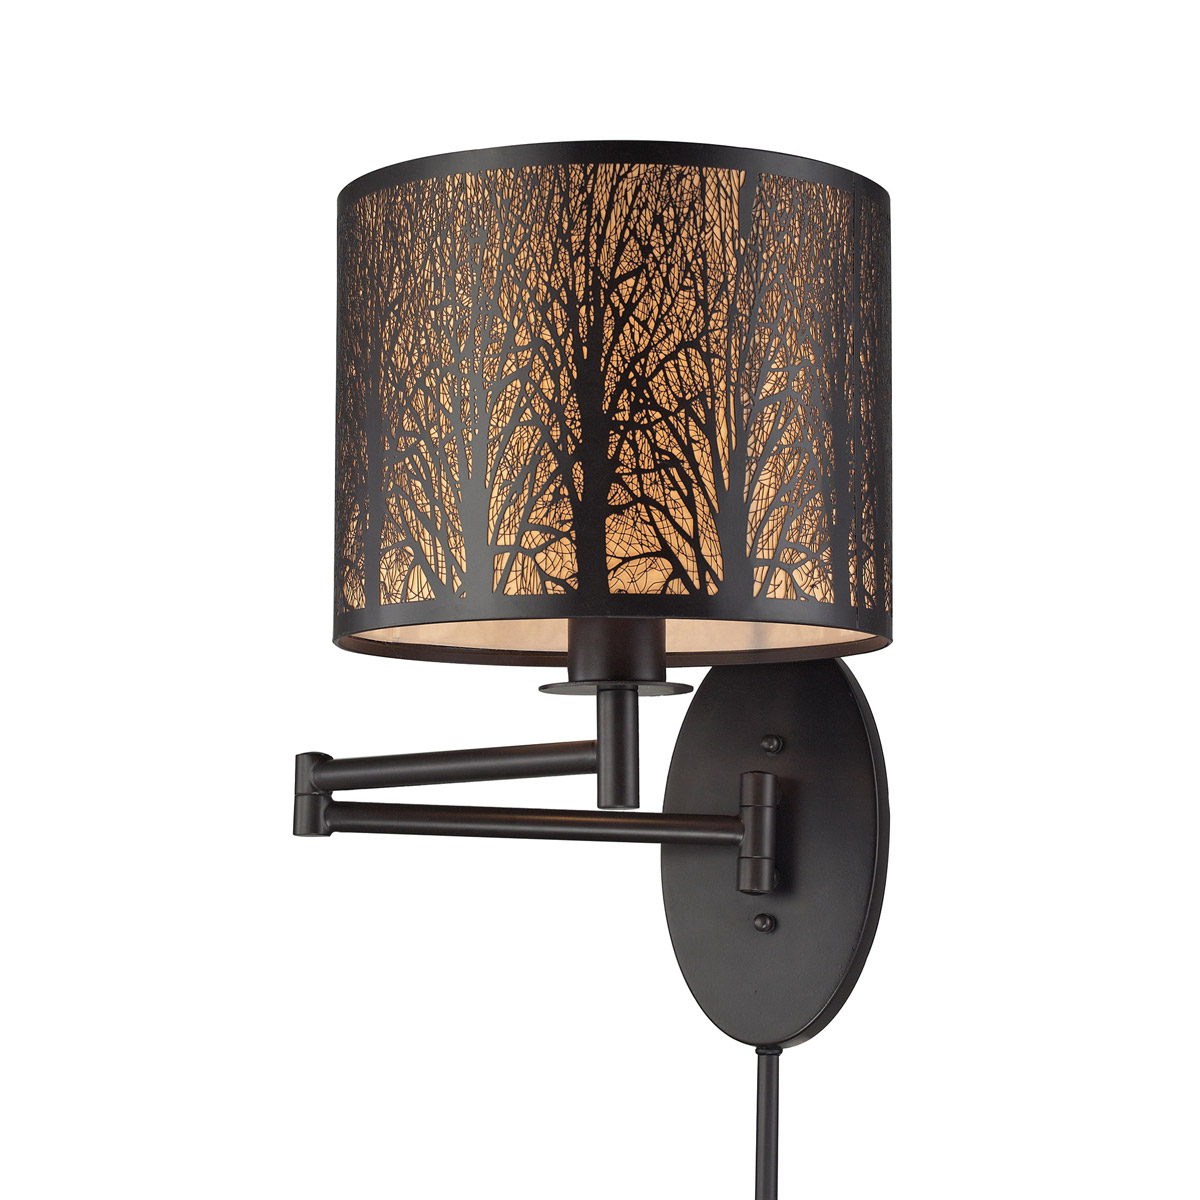 ELK Lighting, Wall Sconces for Sale, Brooklyn, Accentuations Brand, Furniture by ABD